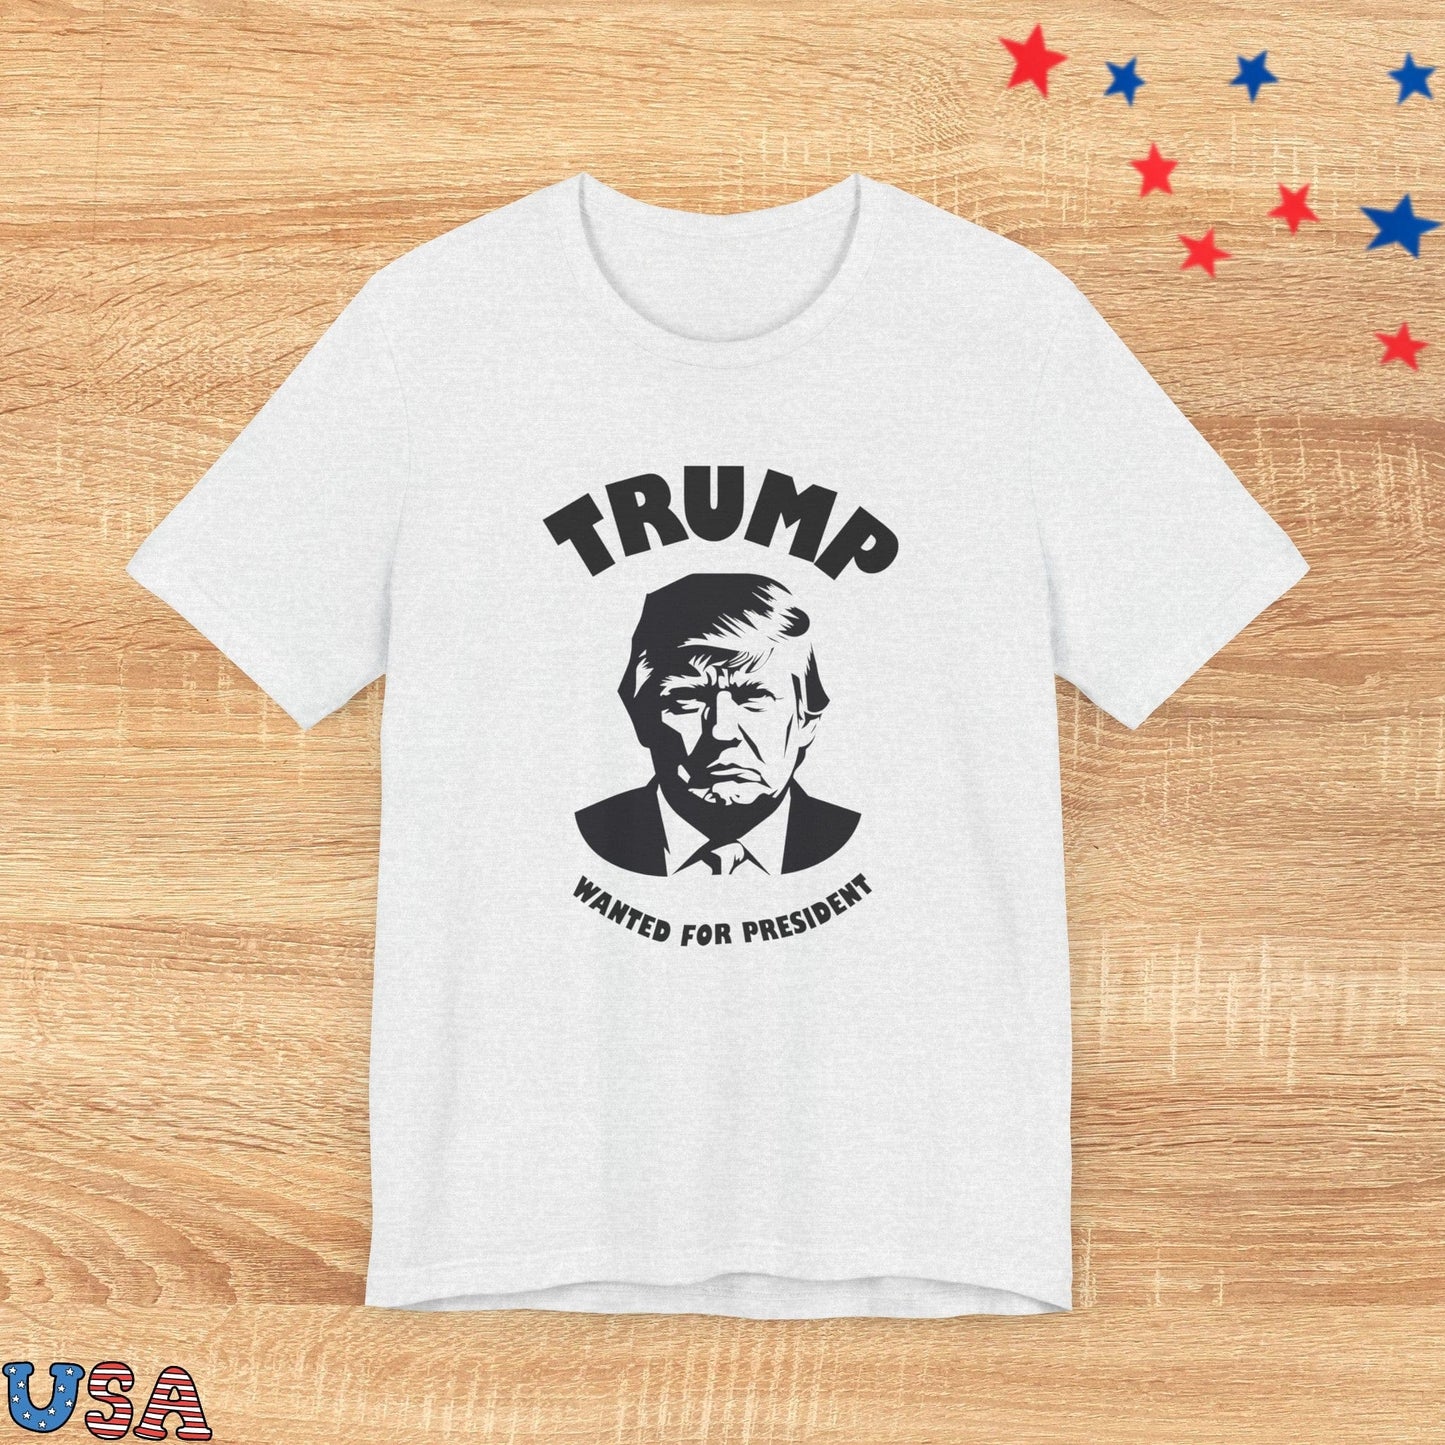 patriotic stars T-Shirt Ash / XS Trump Wanted For President